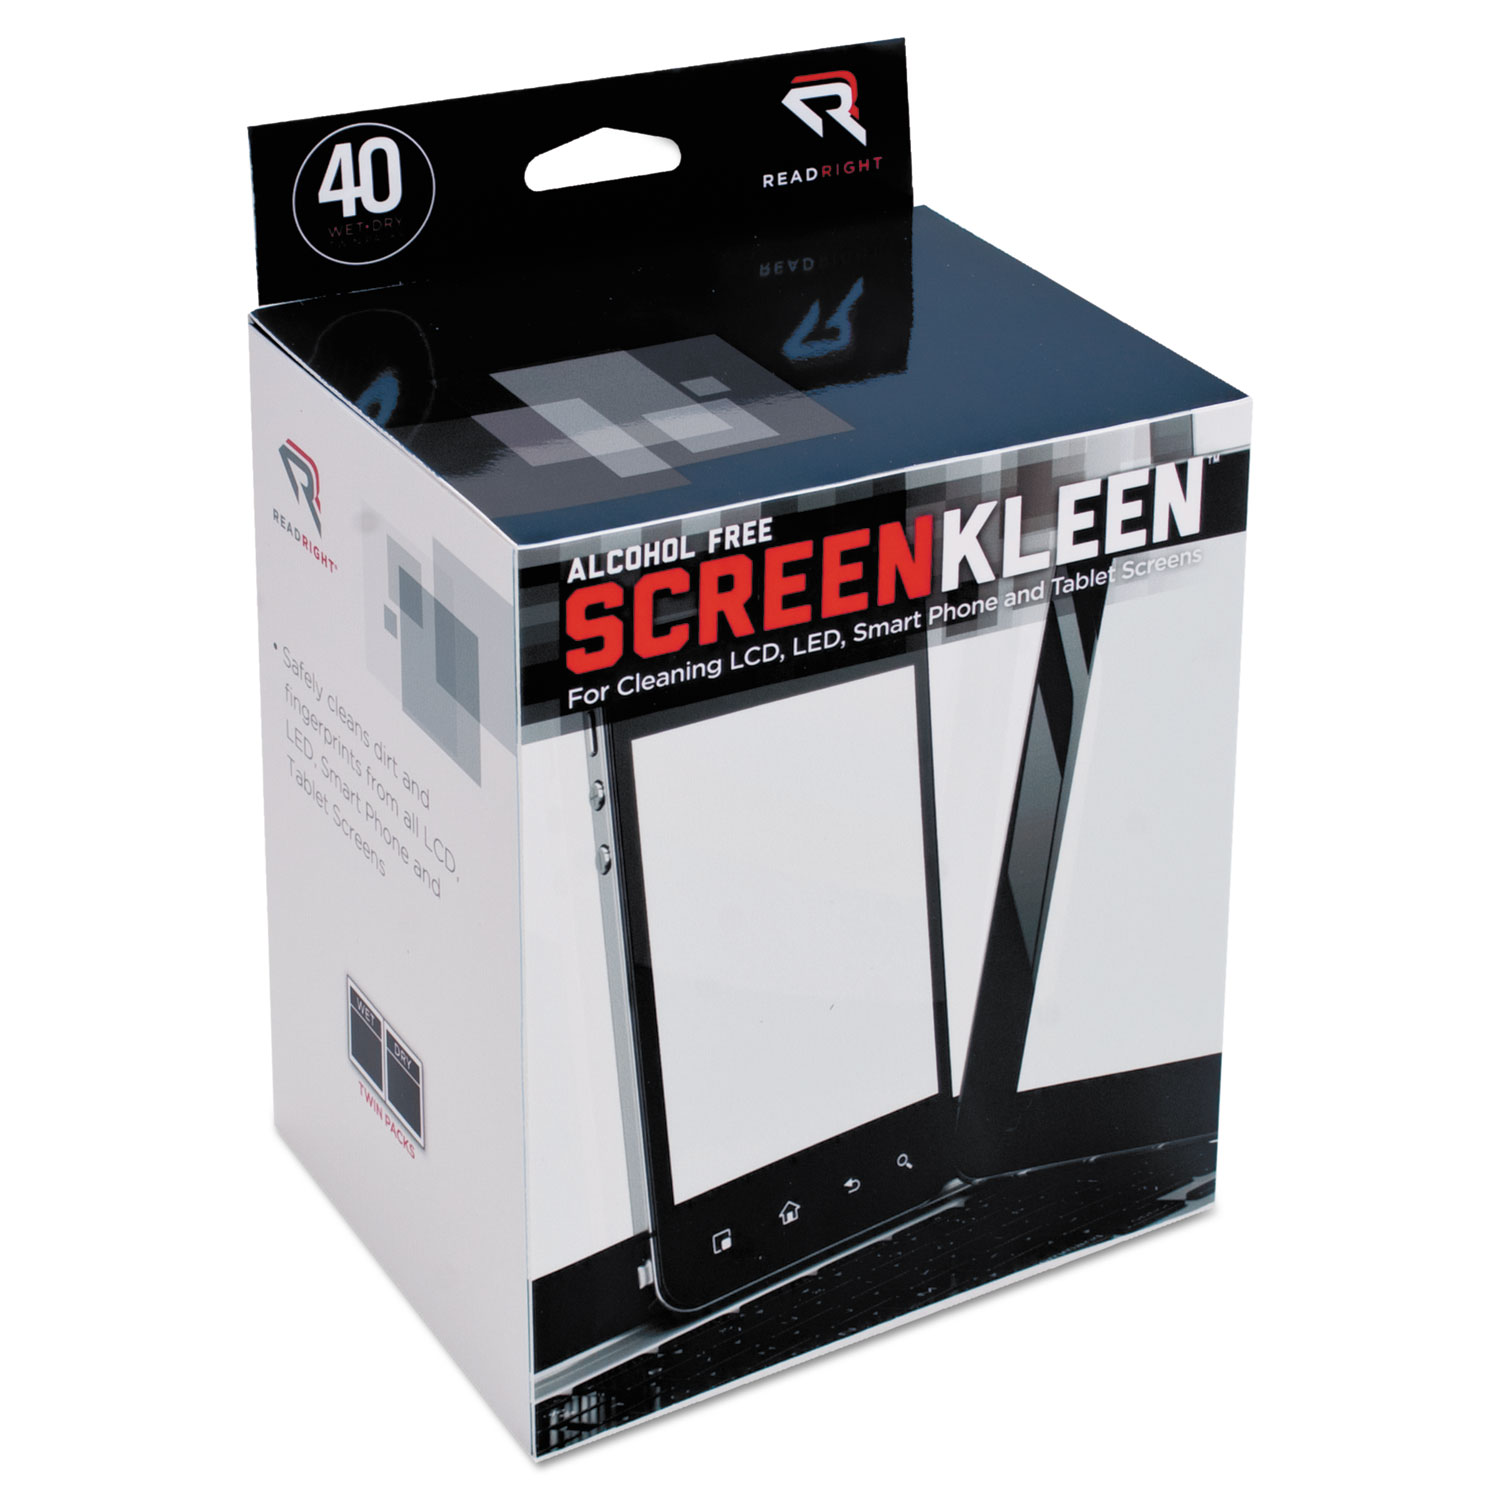  Read Right RR1391 ScreenKleen Alcohol-Free Wet Wipes, Cloth, 5 x 5, 40/Box (REARR1391) 